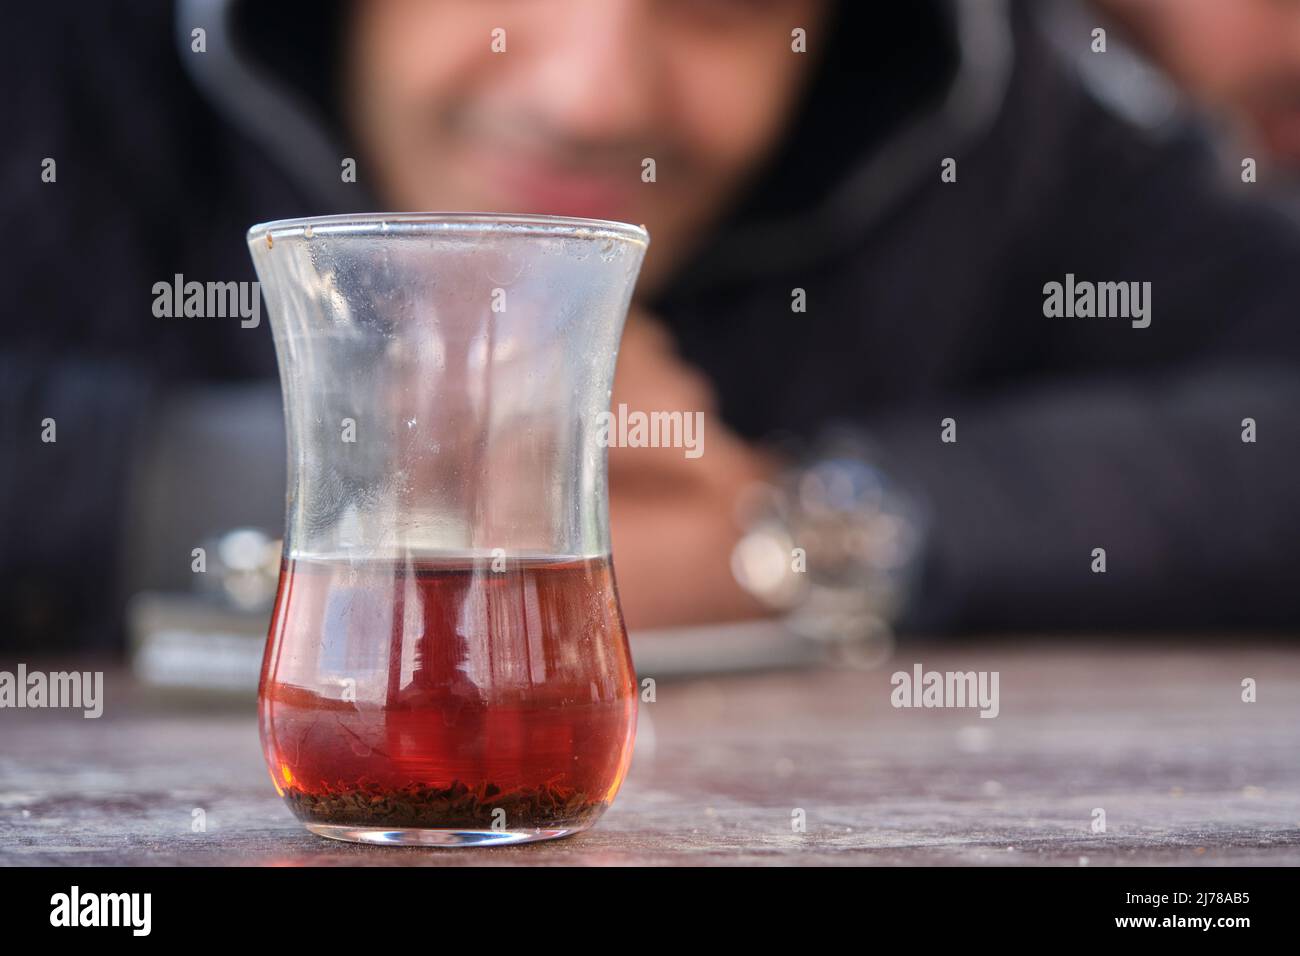 Traditional turkish tea inside traditional slim waisted glass cup, blurred smiley man photo behind the tea glass. Stock Photo